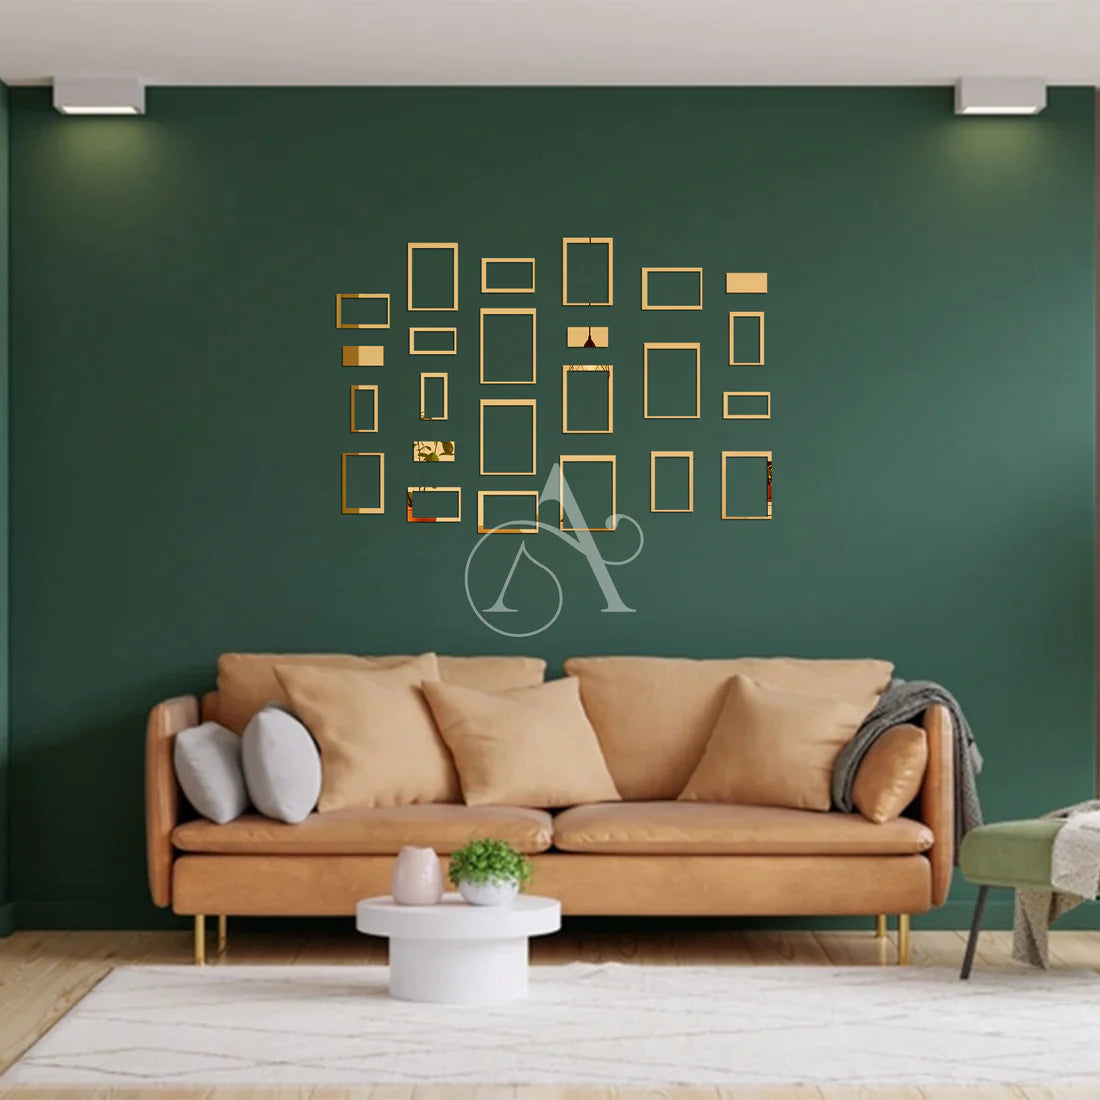 Acrylic Rectangle Ring Mirror Wall Stickers